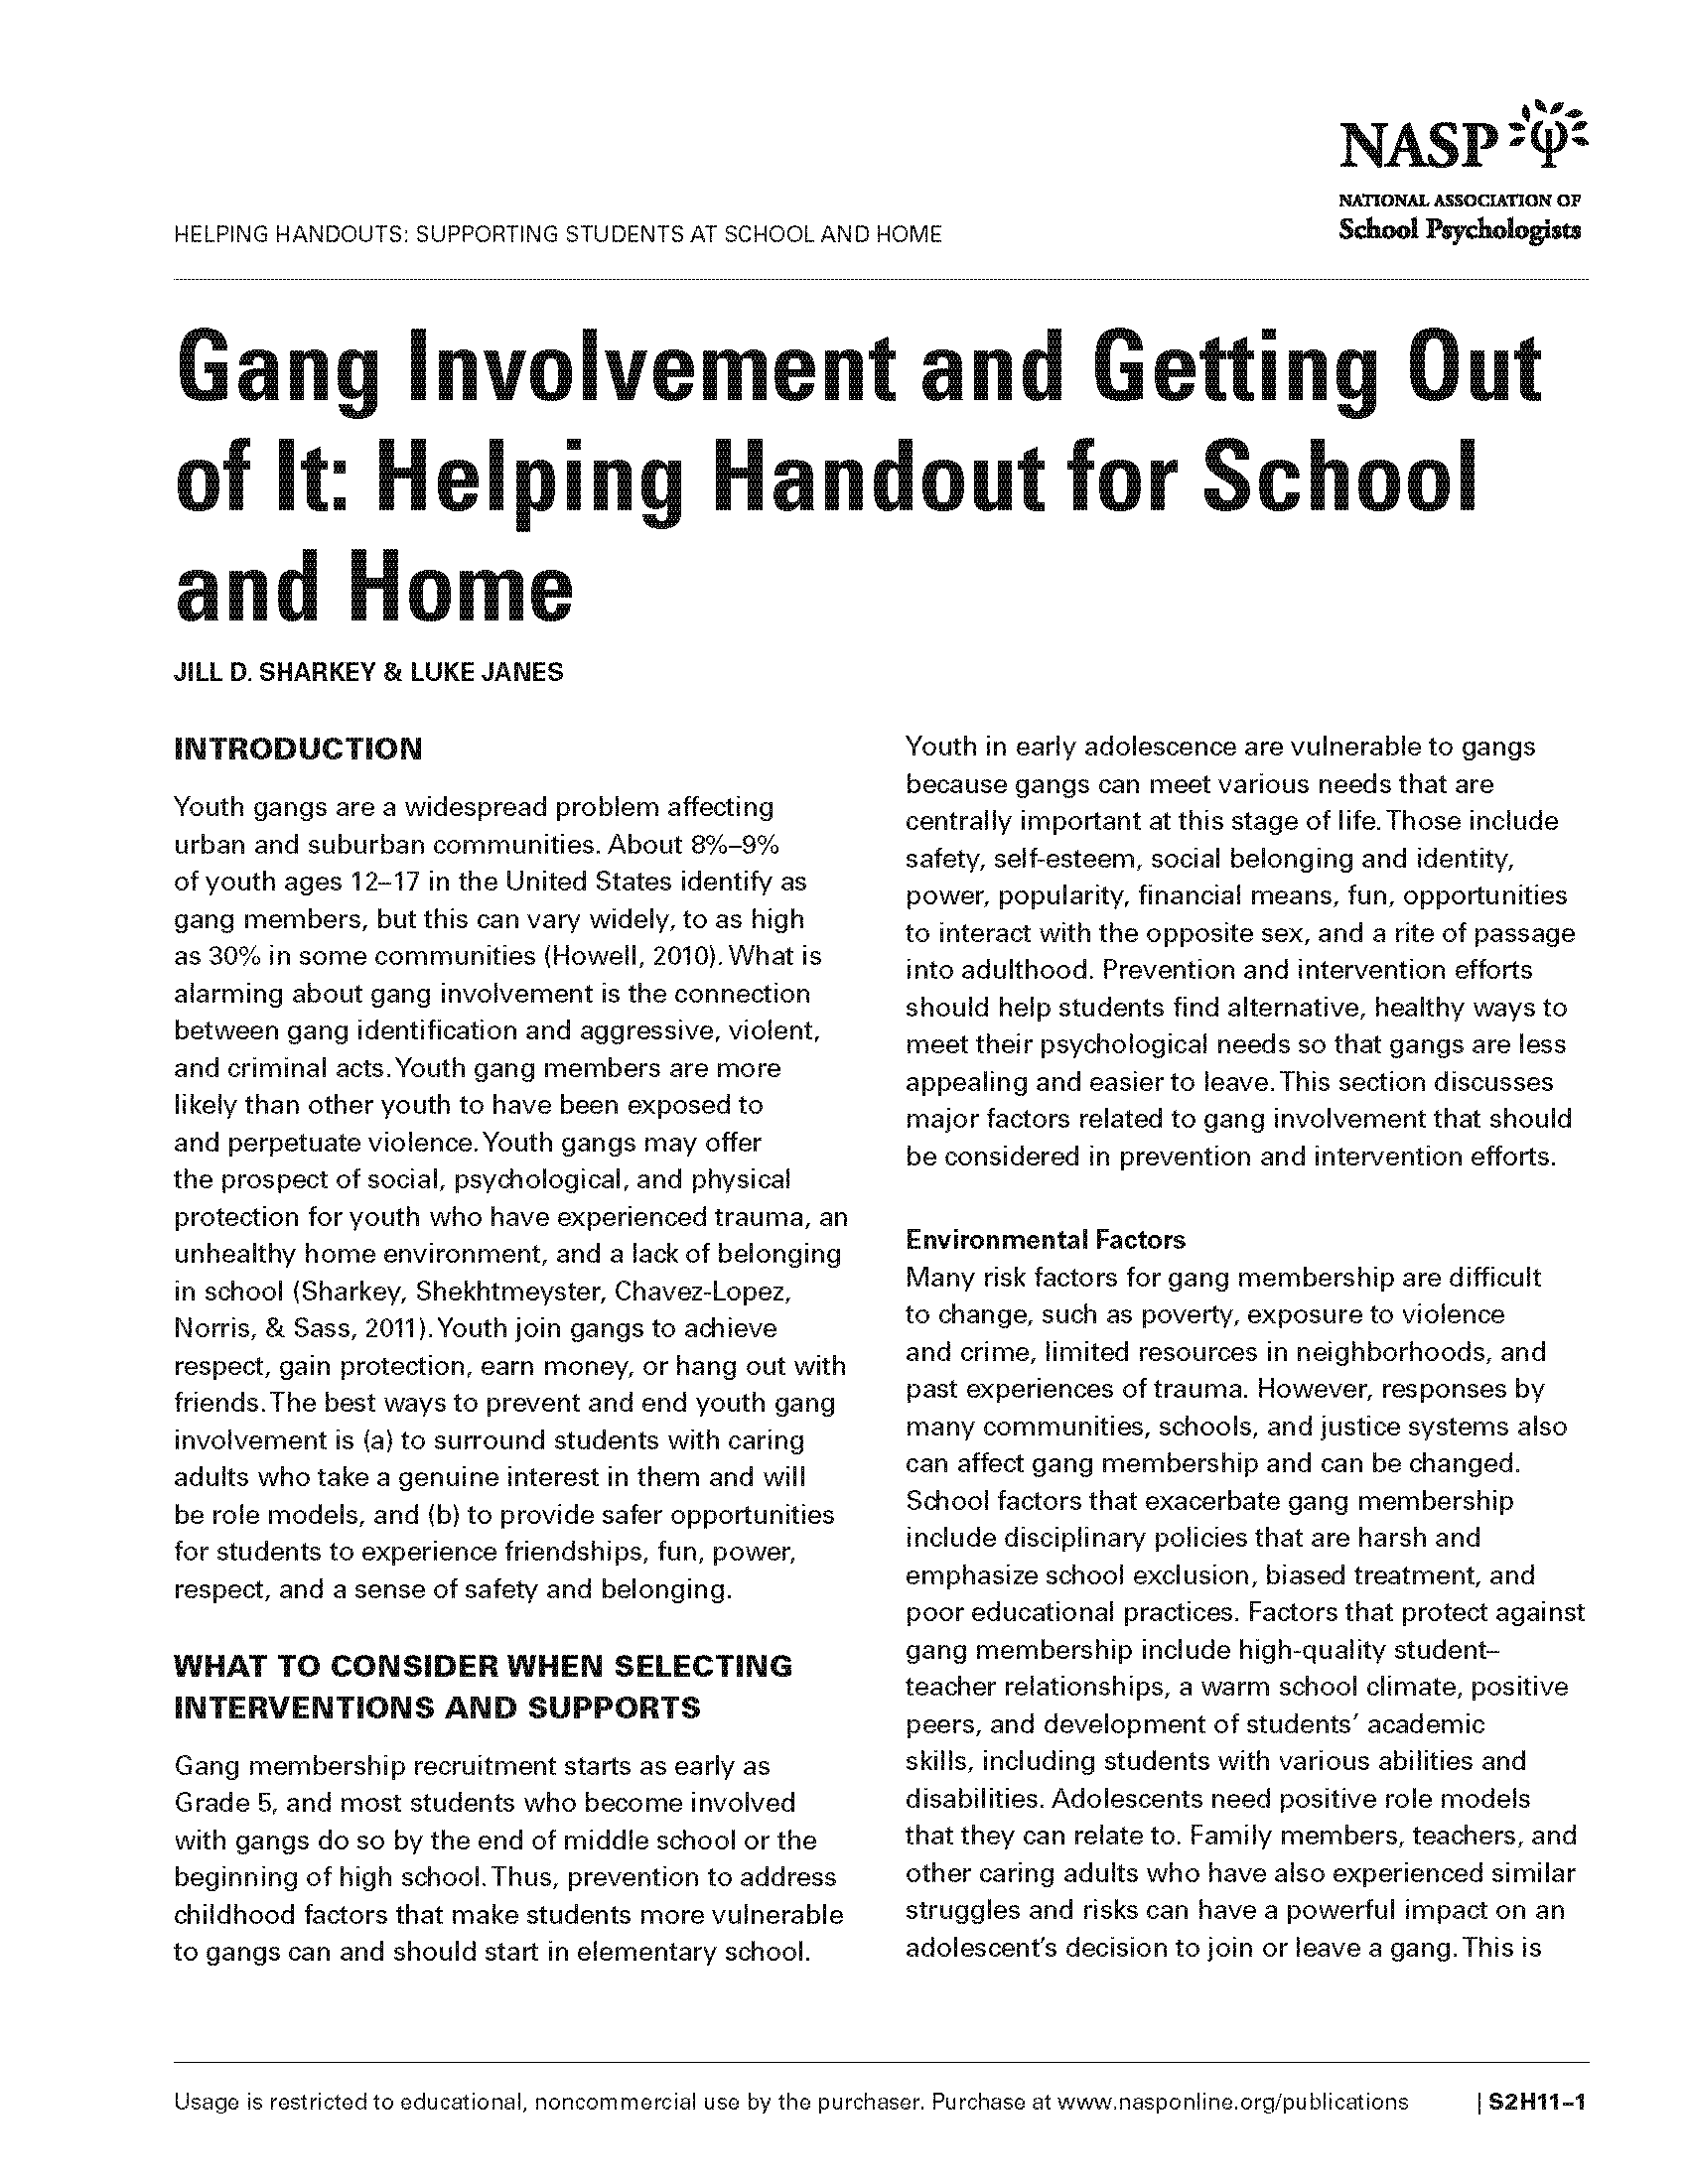 Gang Involvement and Getting Out of It: Helping Handout for School and Home